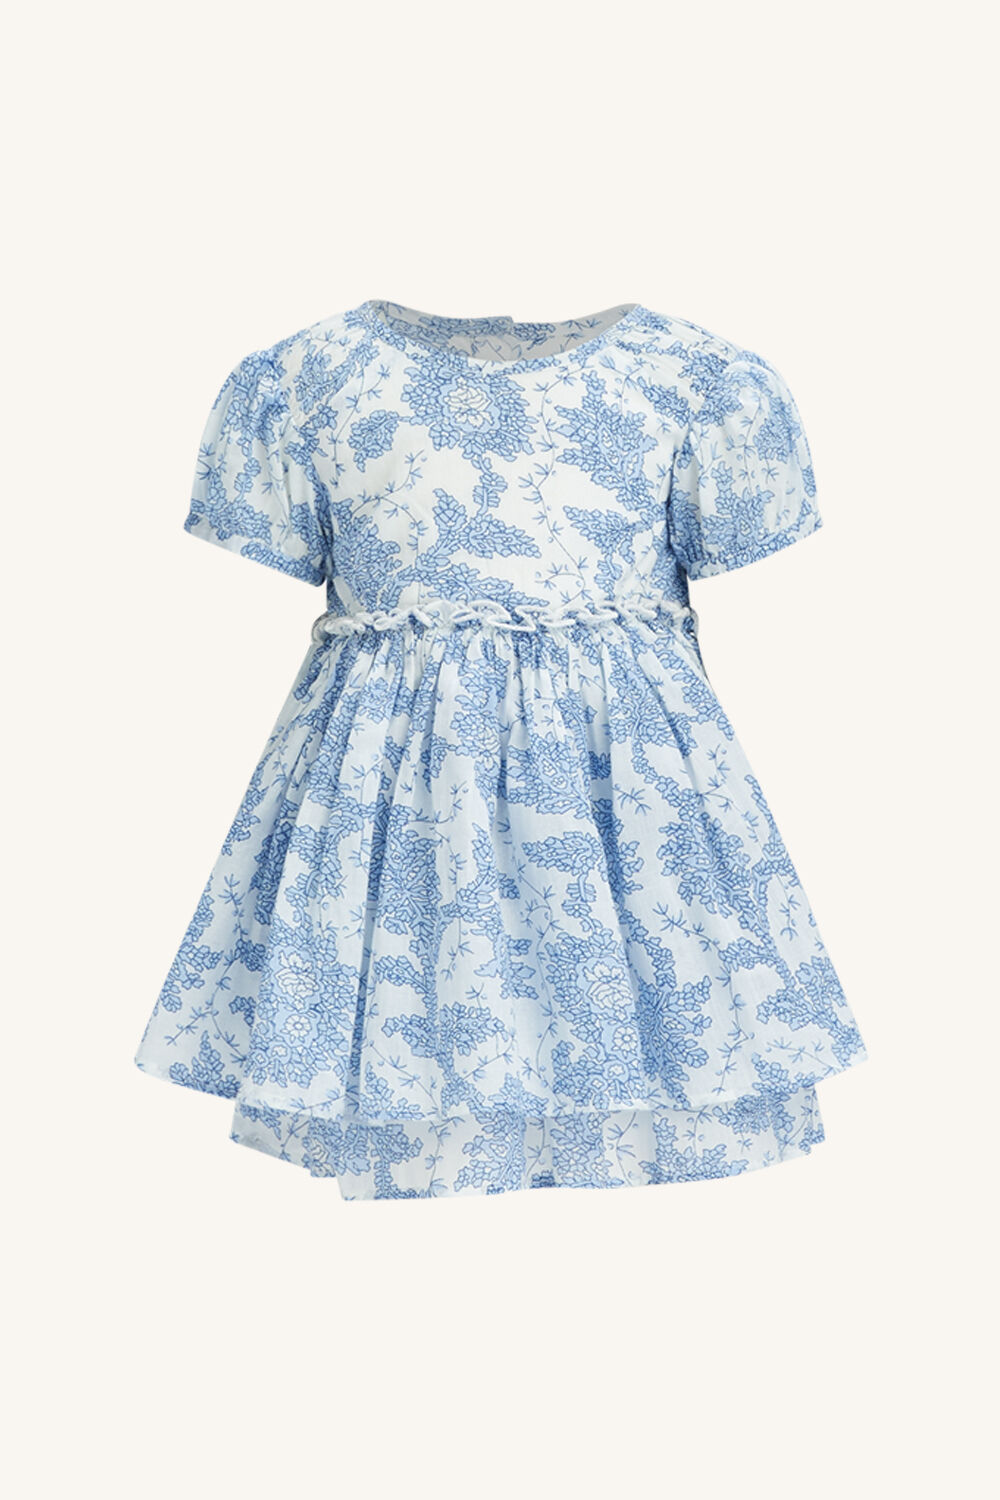 BABY GIRL LANI FLORAL MINI DRESS in colour BABY BLUE